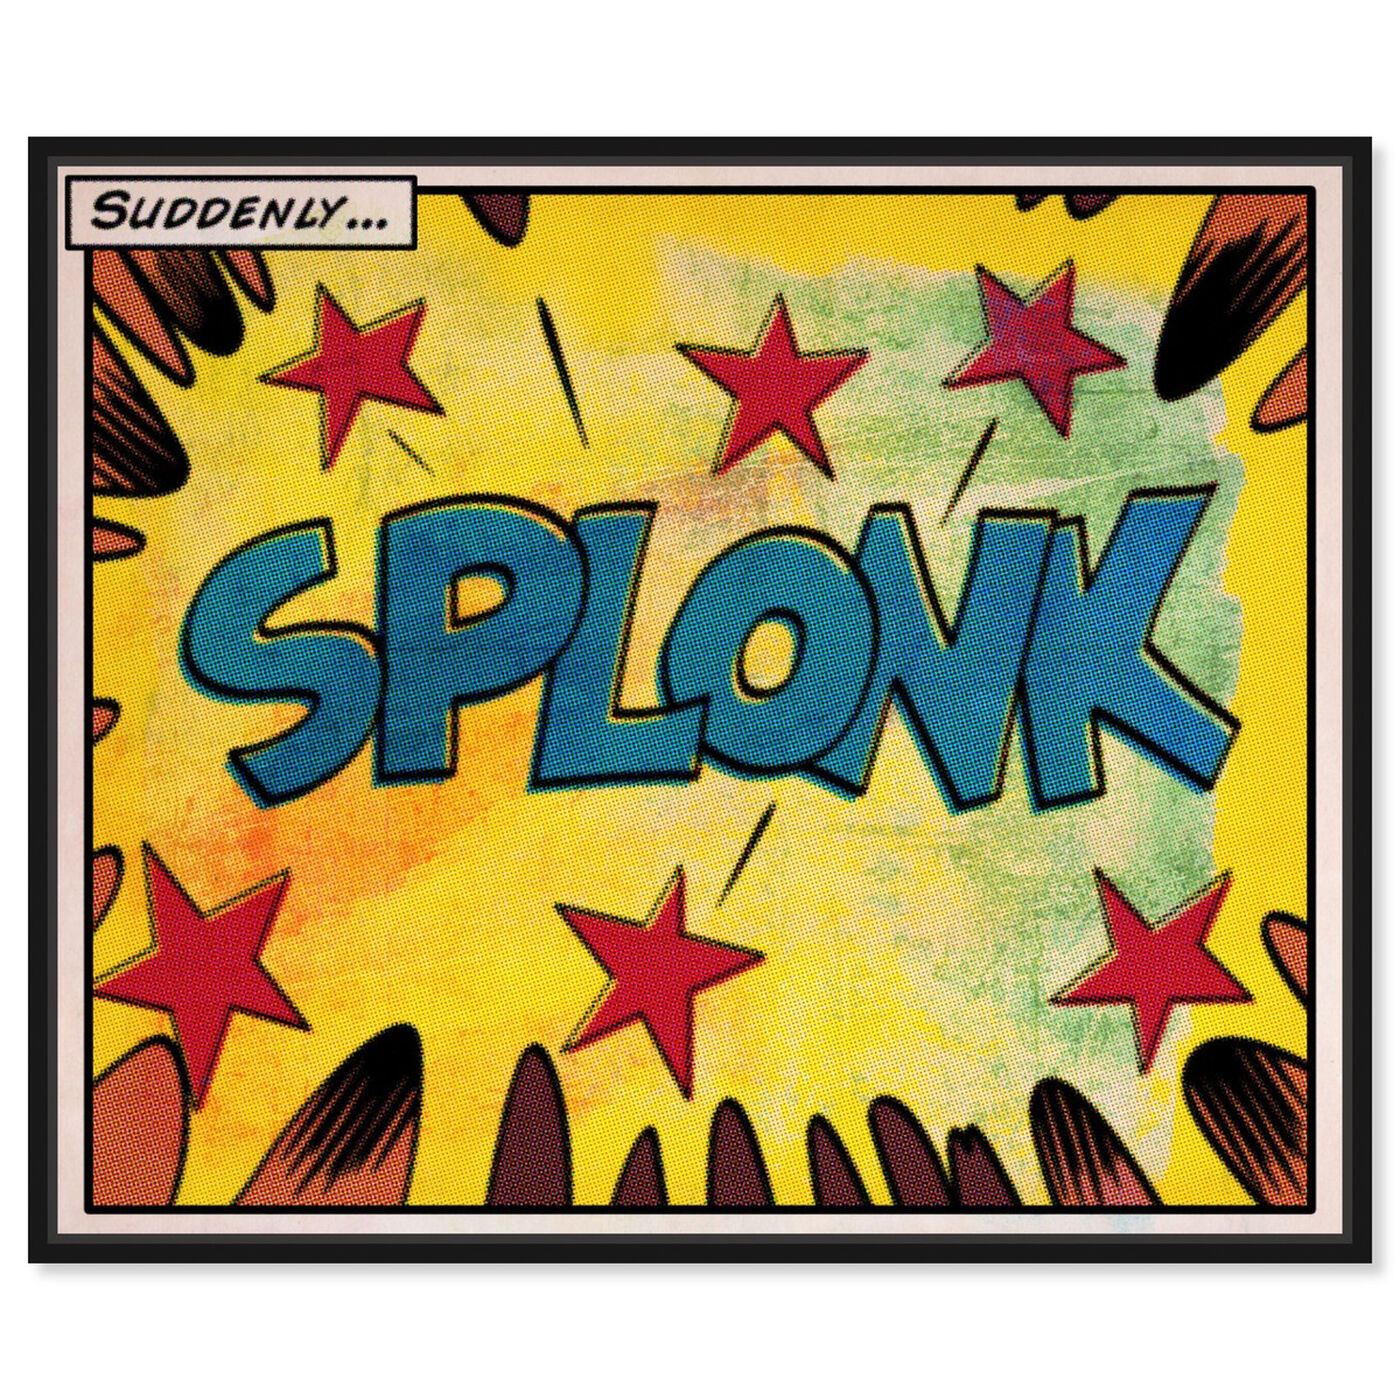 Front view of Splonk featuring advertising and comics art.